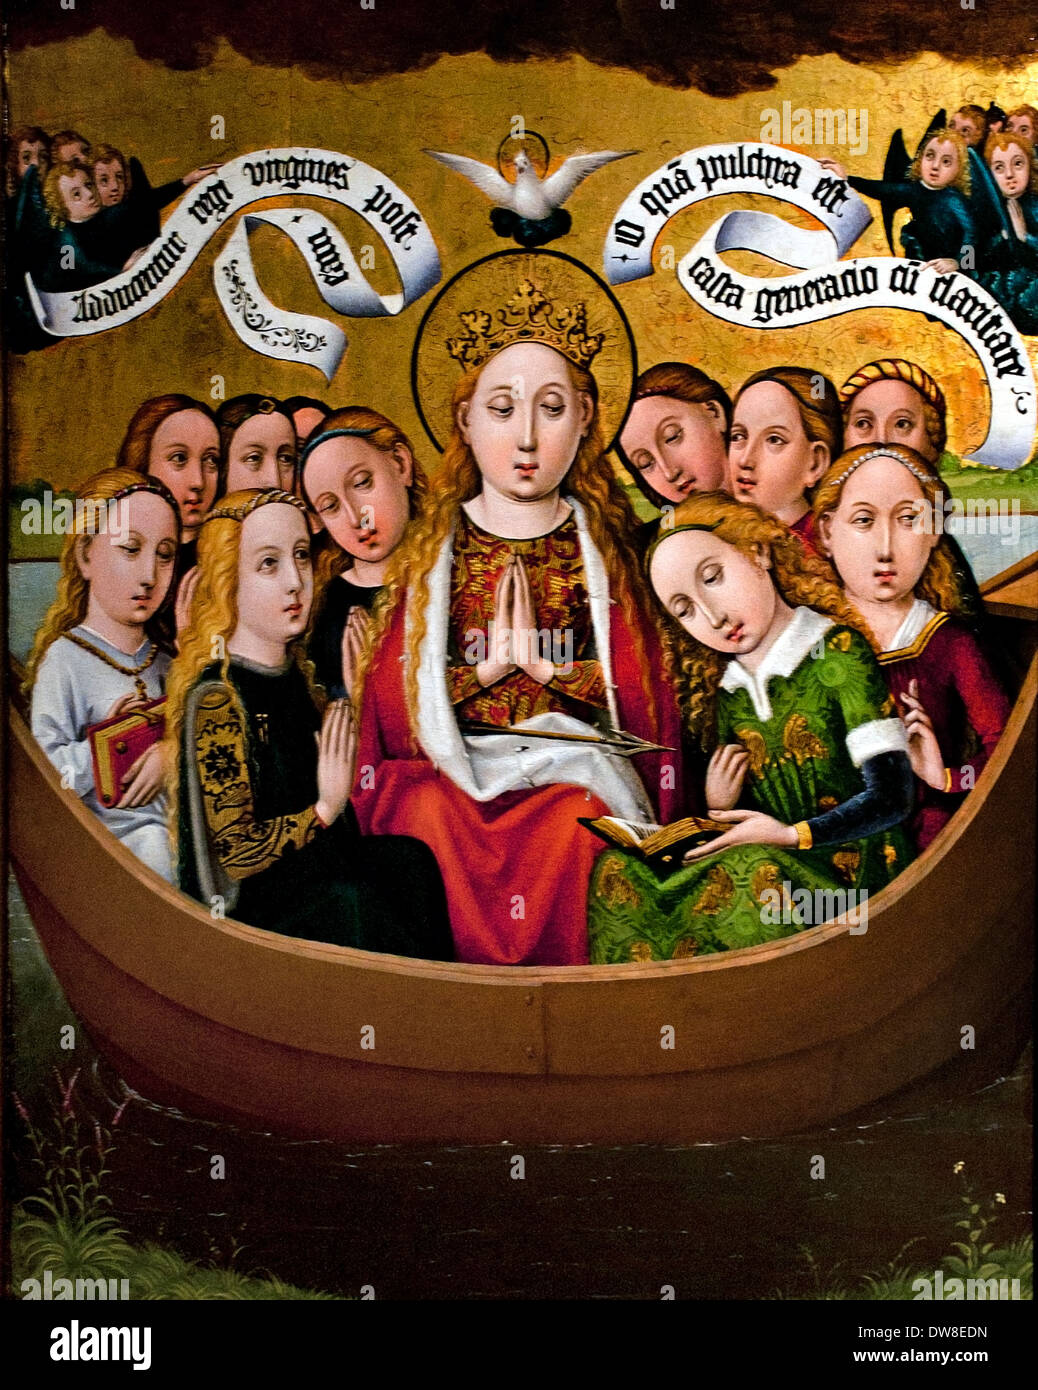 St Ursula and her companions in a ship 1450 Colmar France French Stock Photo